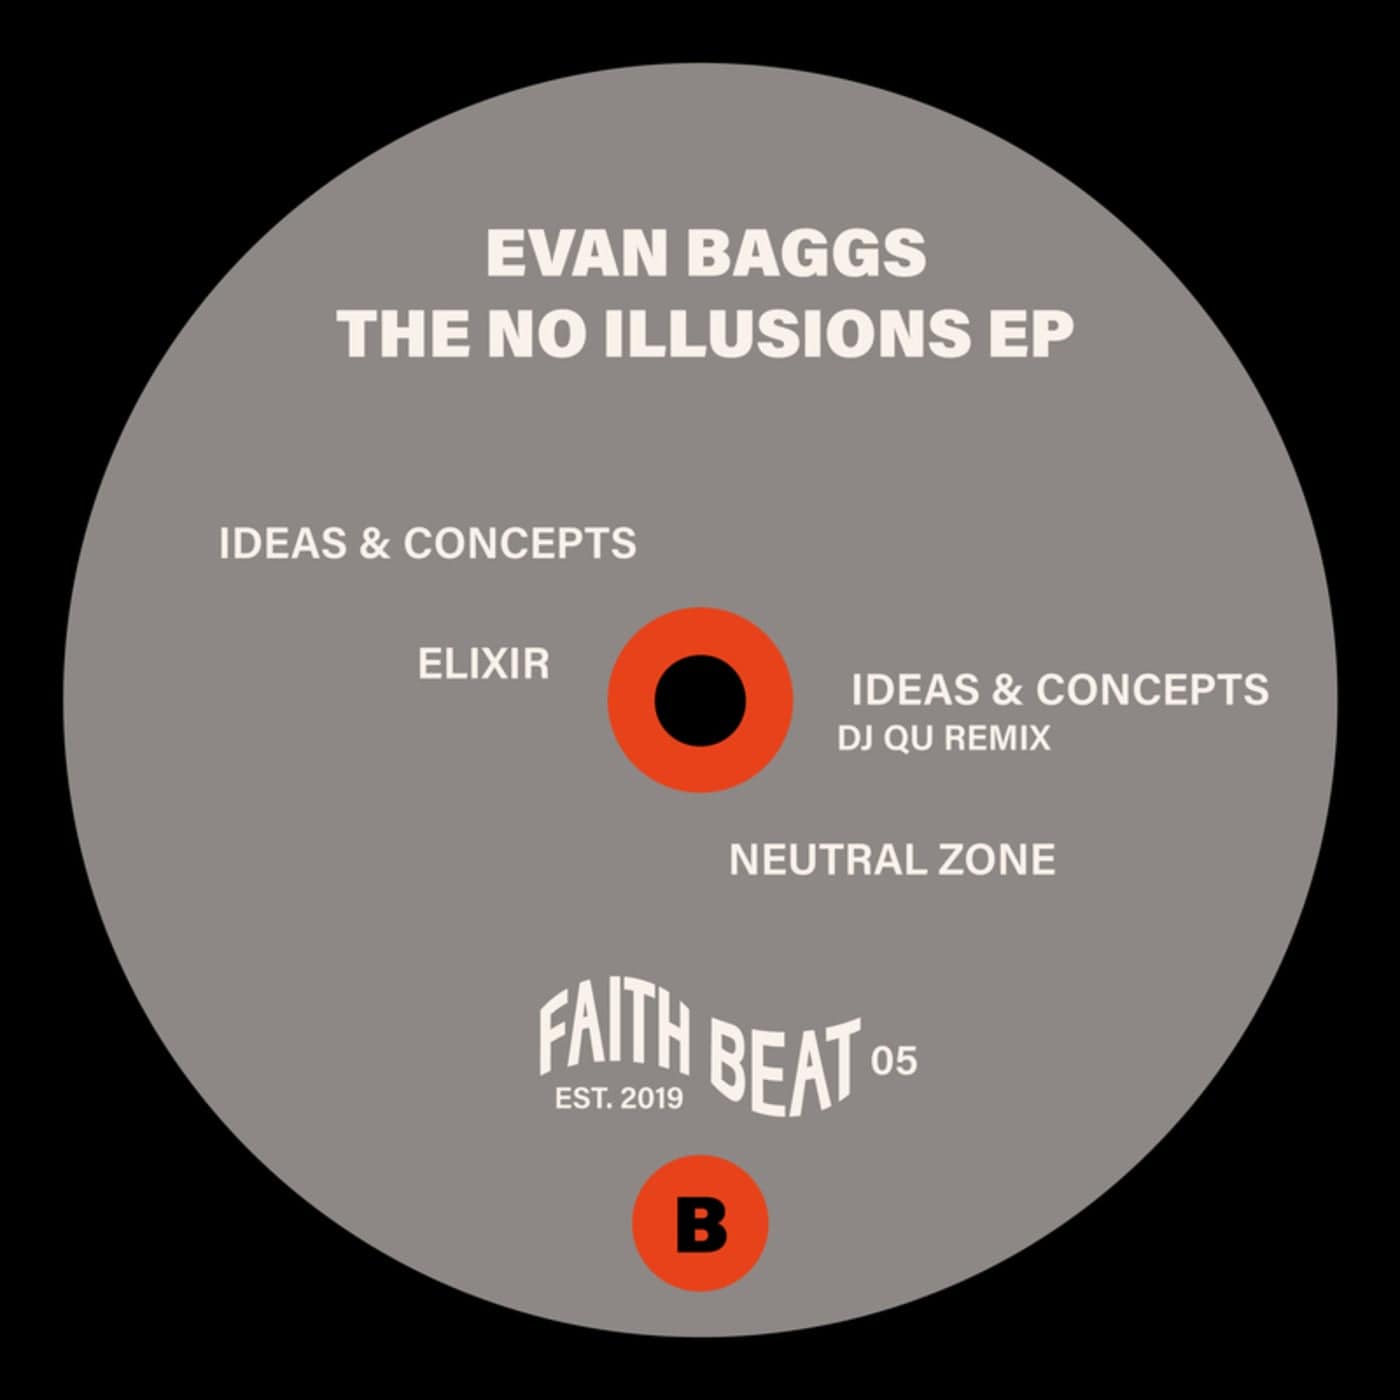 image cover: Evan Baggs - The No Illusions EP / FAITHBEAT05